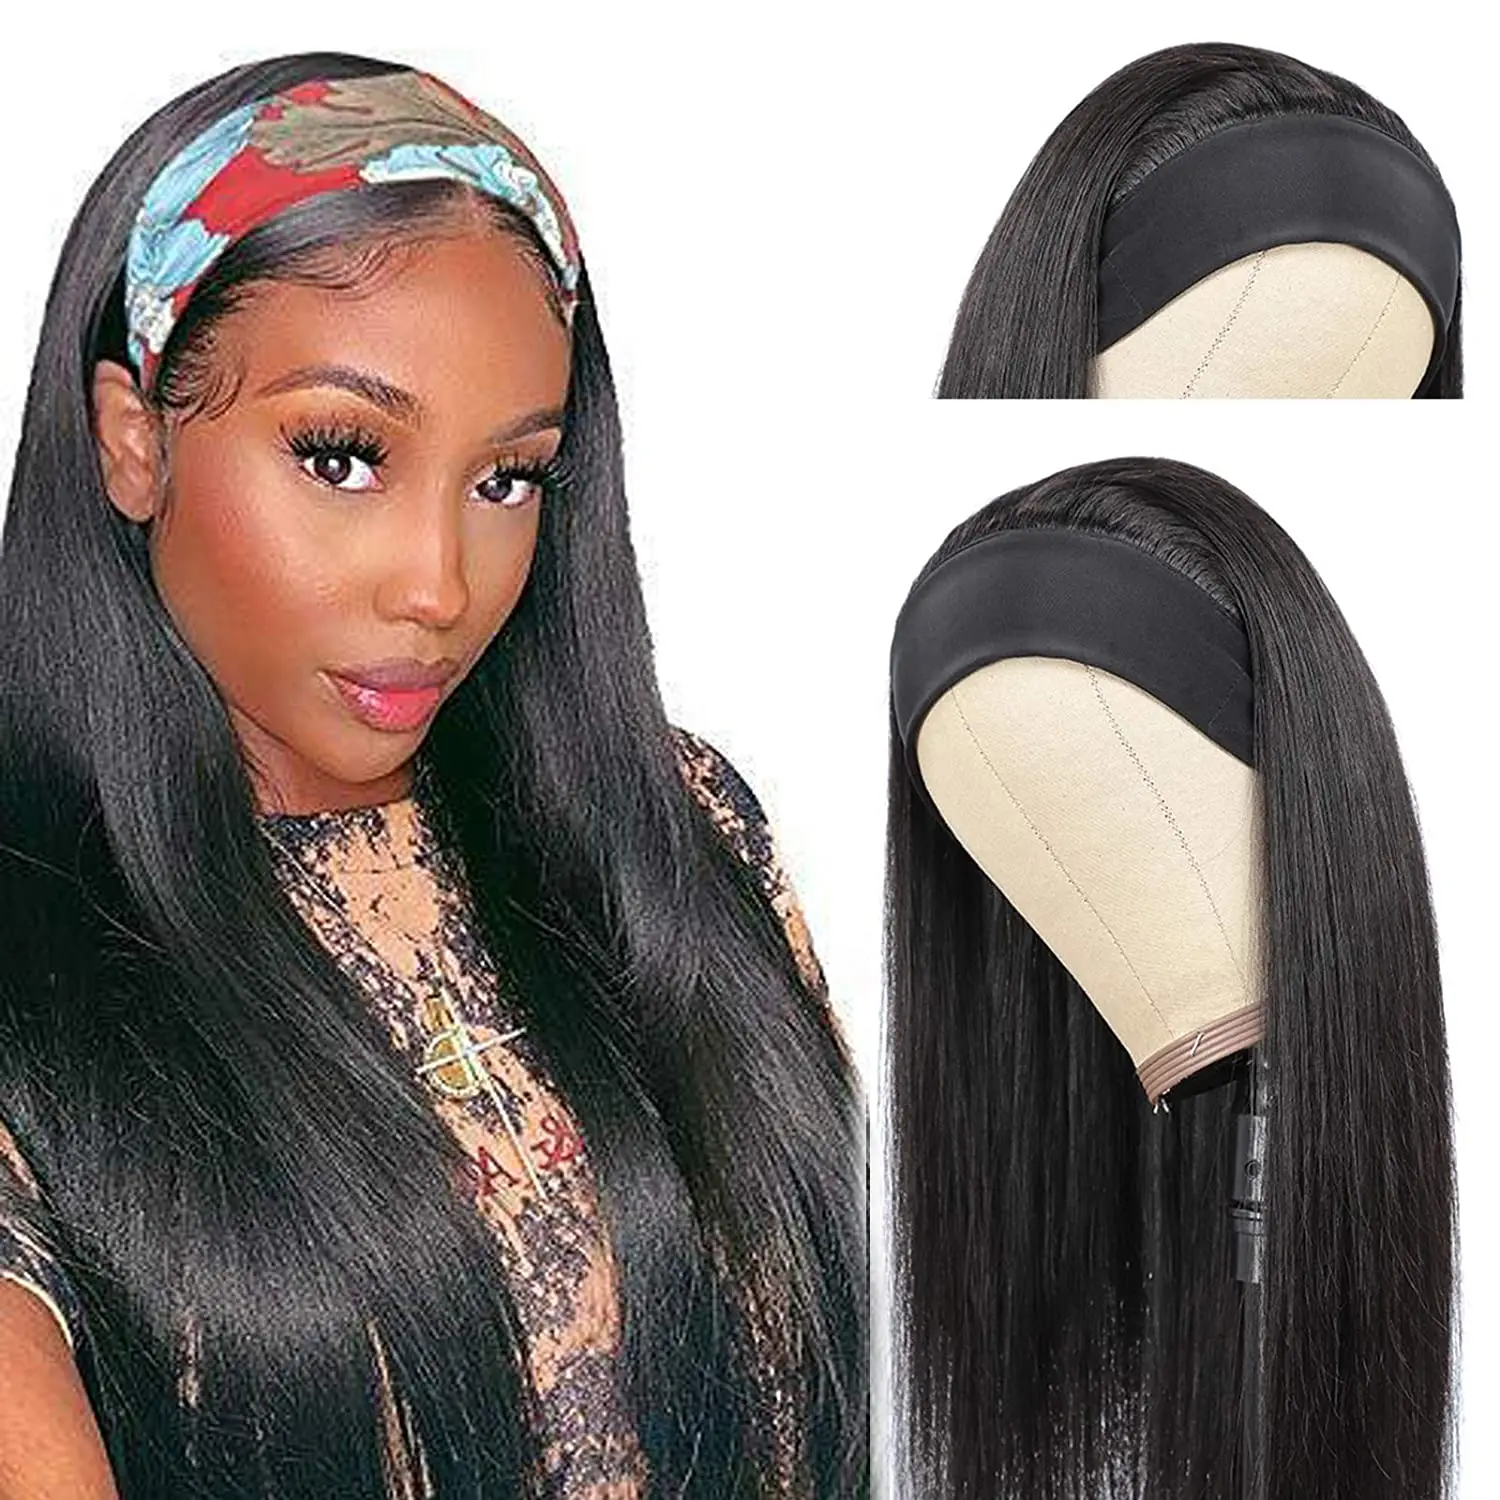 Straight Human Hair Wigs Glueless None Lace Front Wigs Brizilian Remy Hair Machine Made Headband Wig For Black Women 180 Density